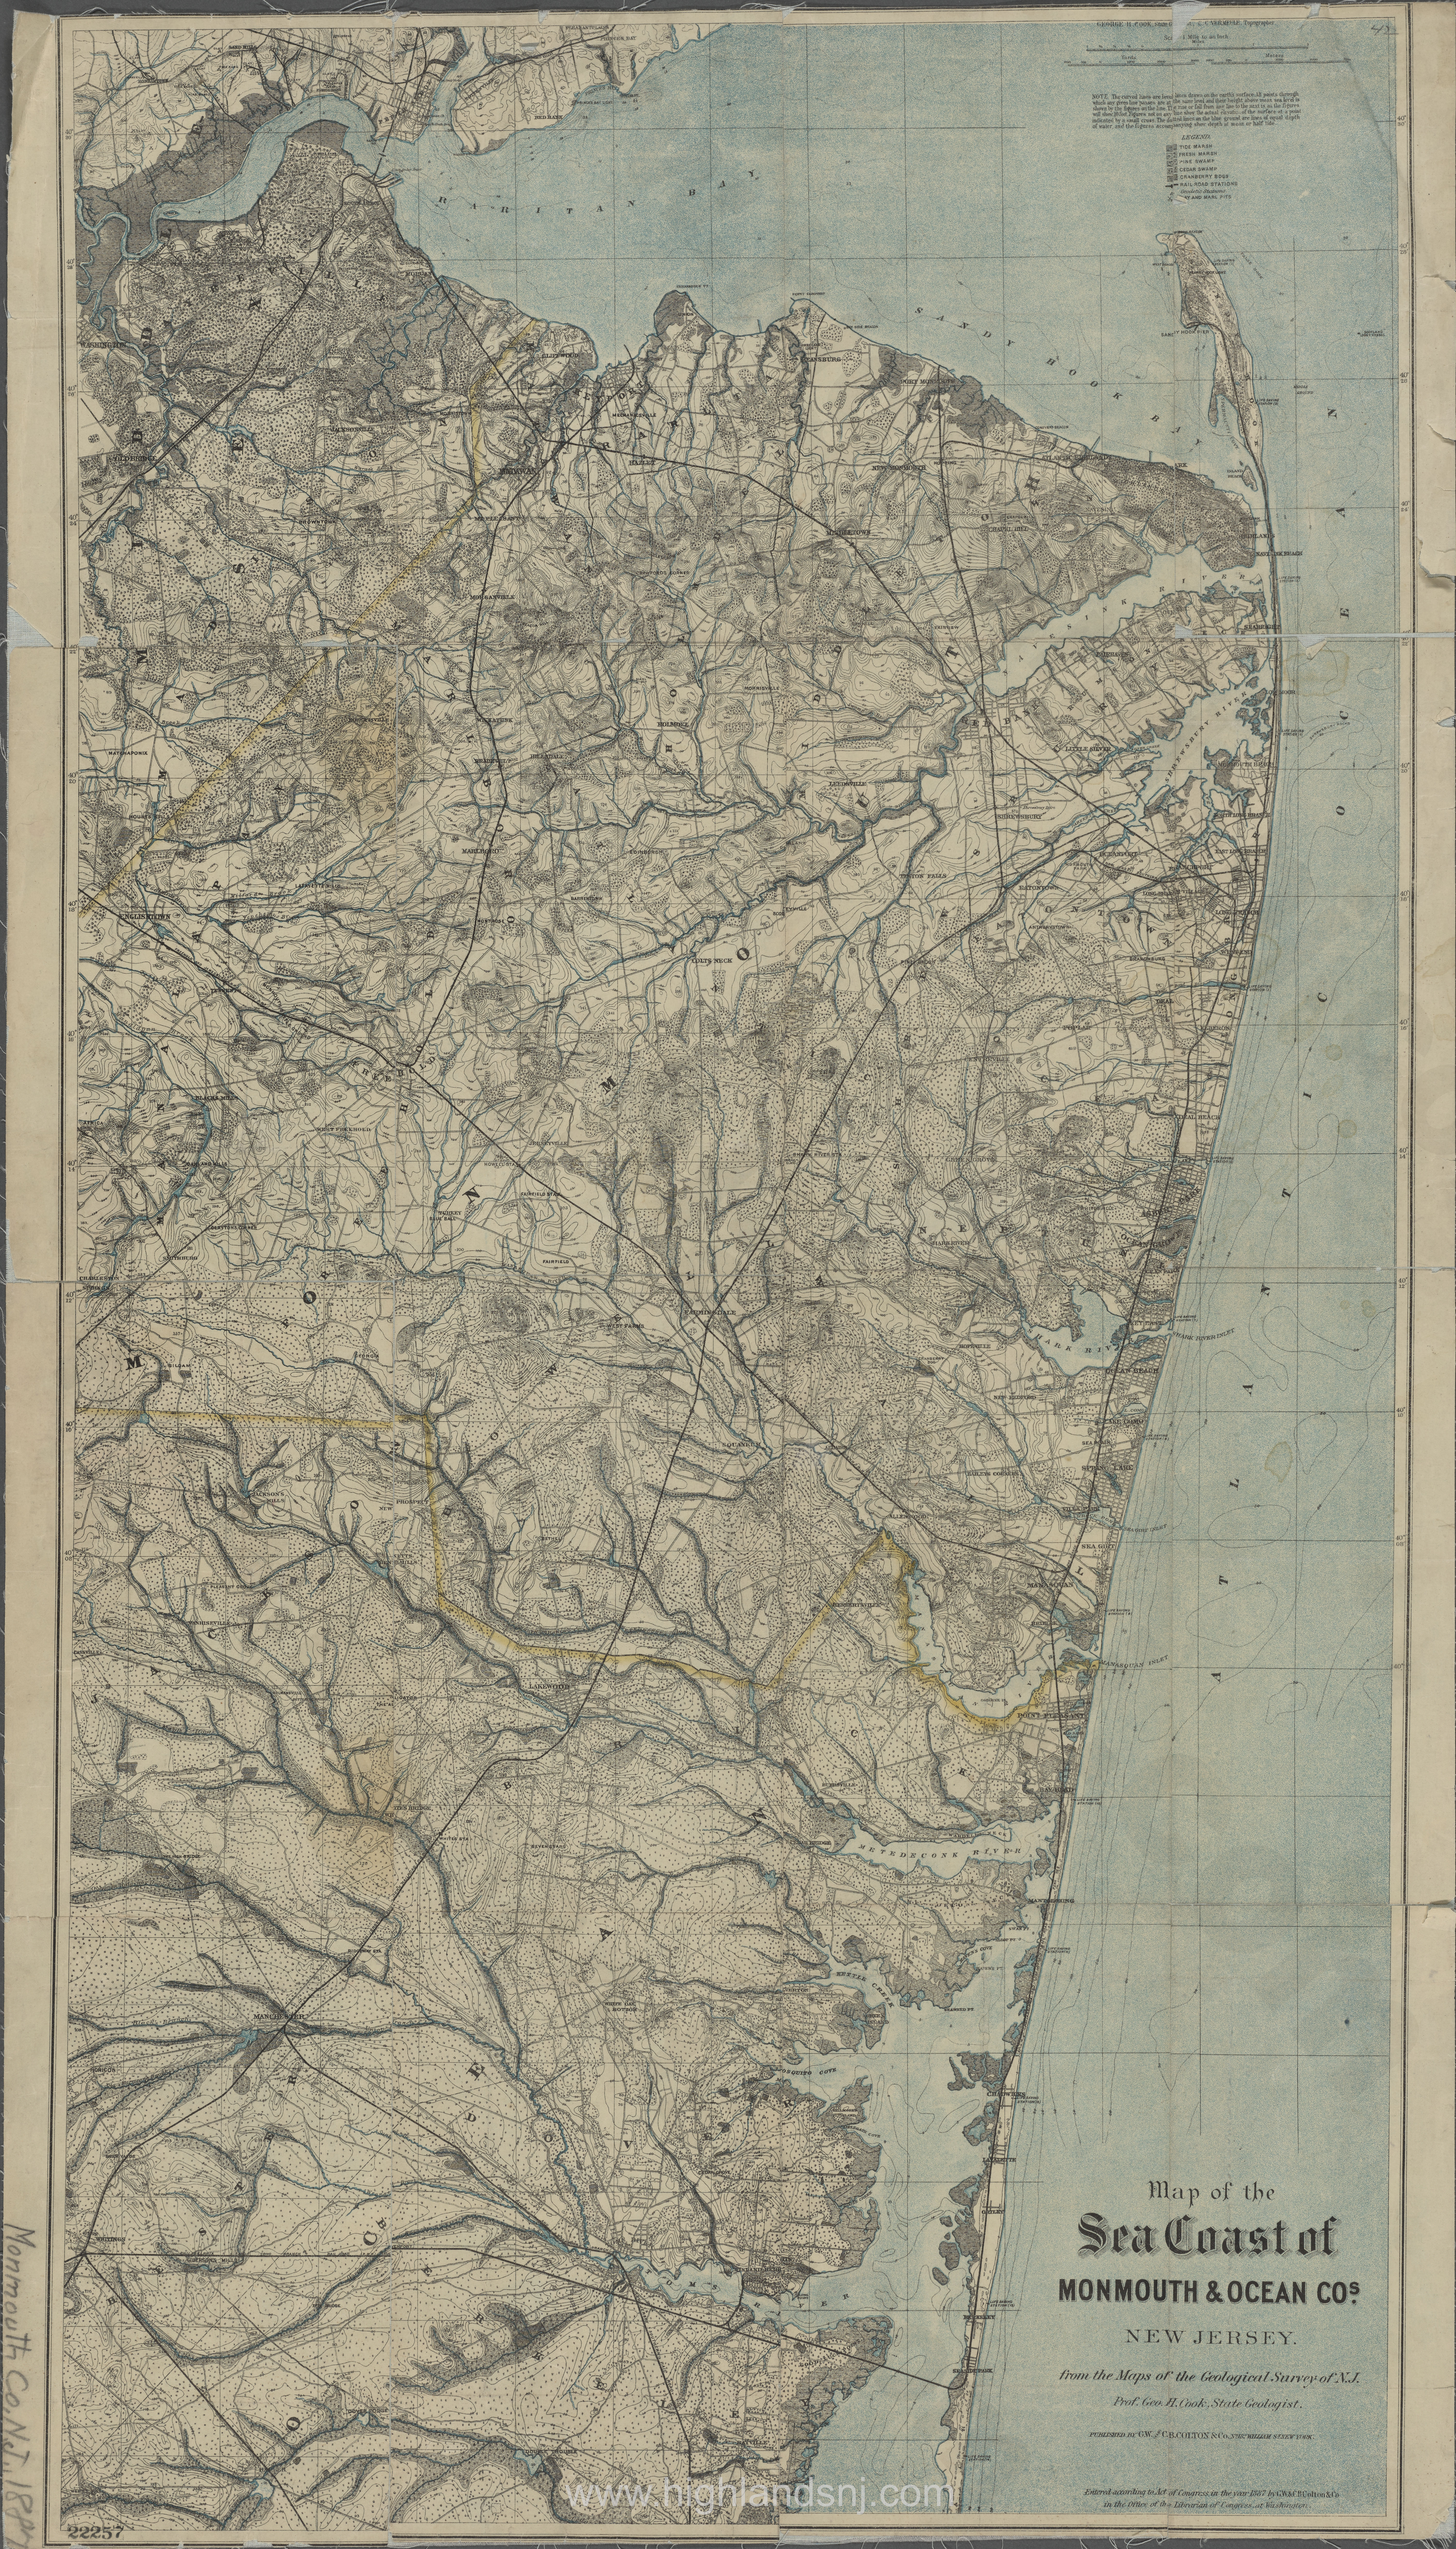 1887 Map of the Sea Coast of Monmouth & Ocean Co.s, New Jersey